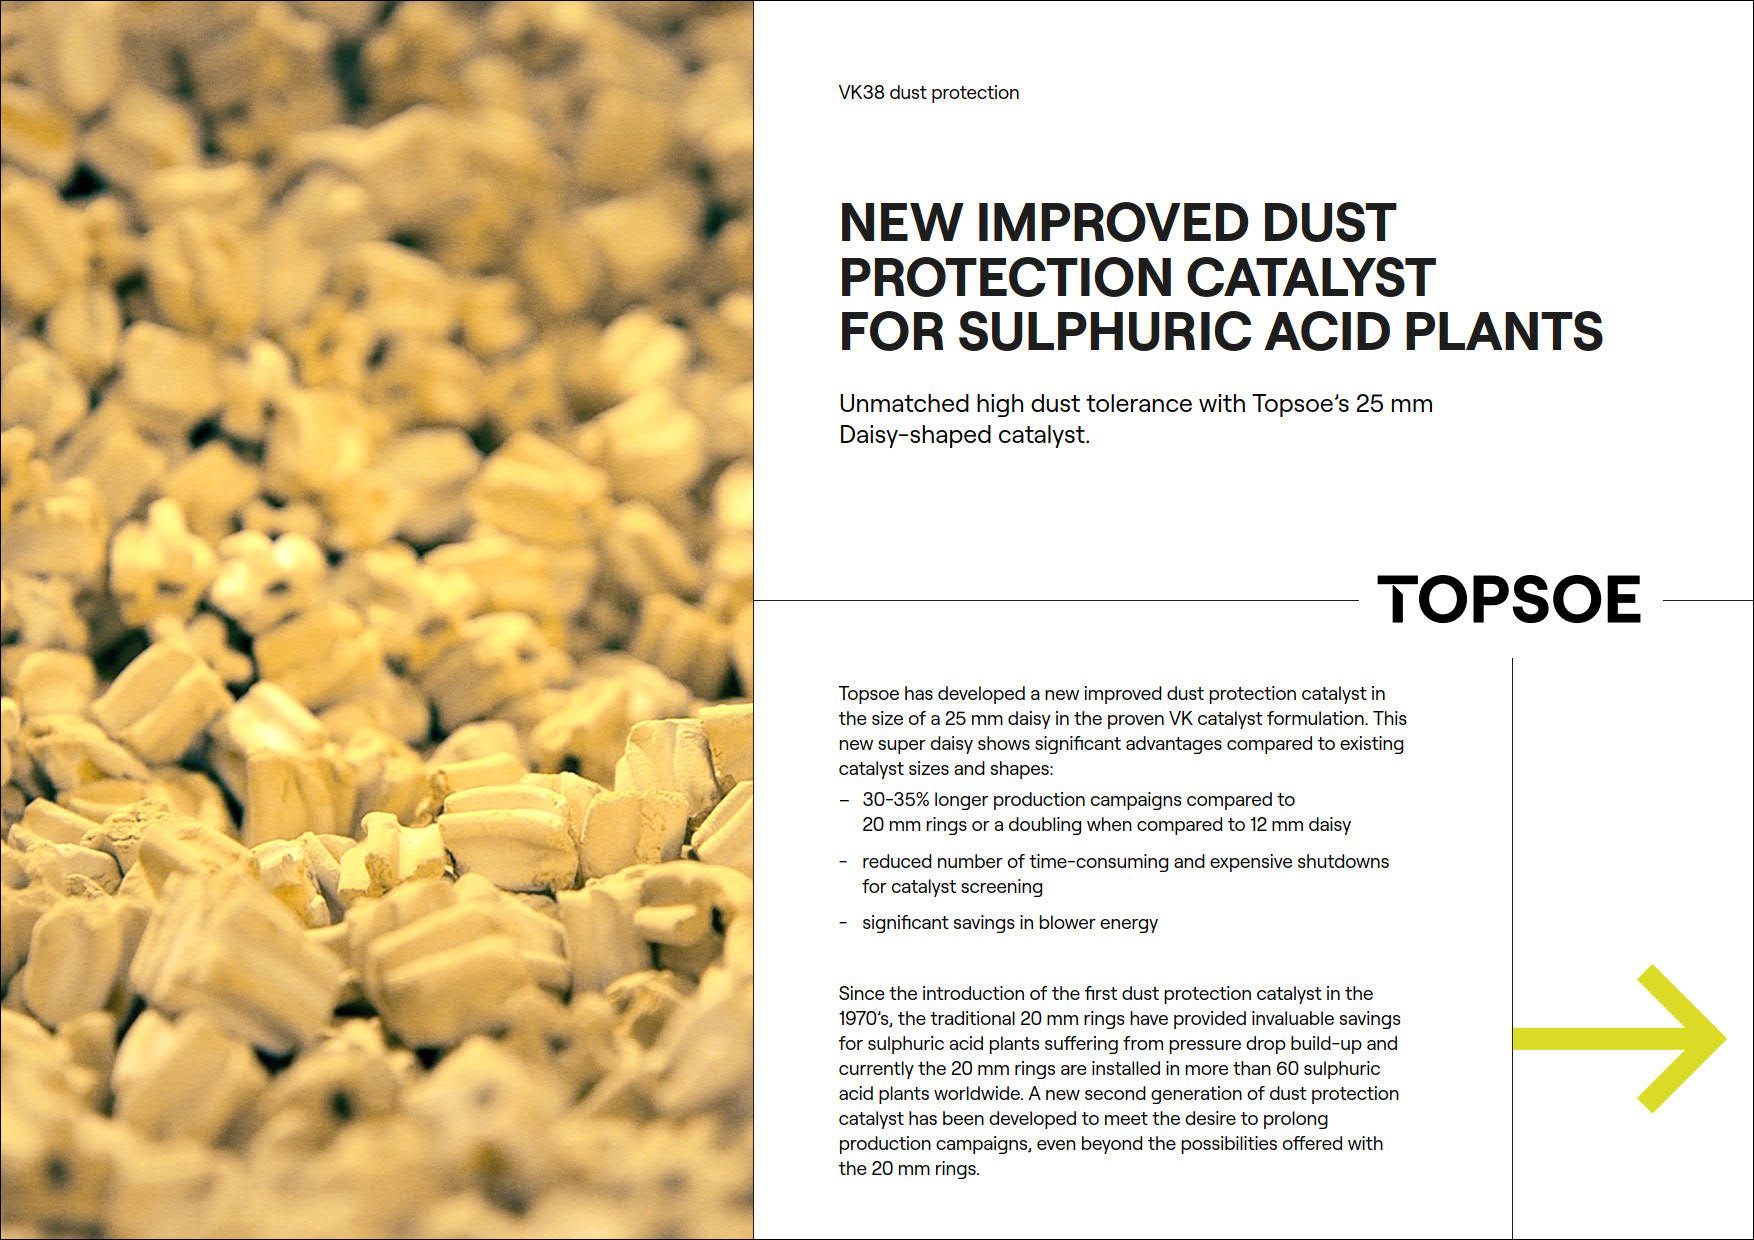 New improved dust protection catalyst for sulphuric acid plants